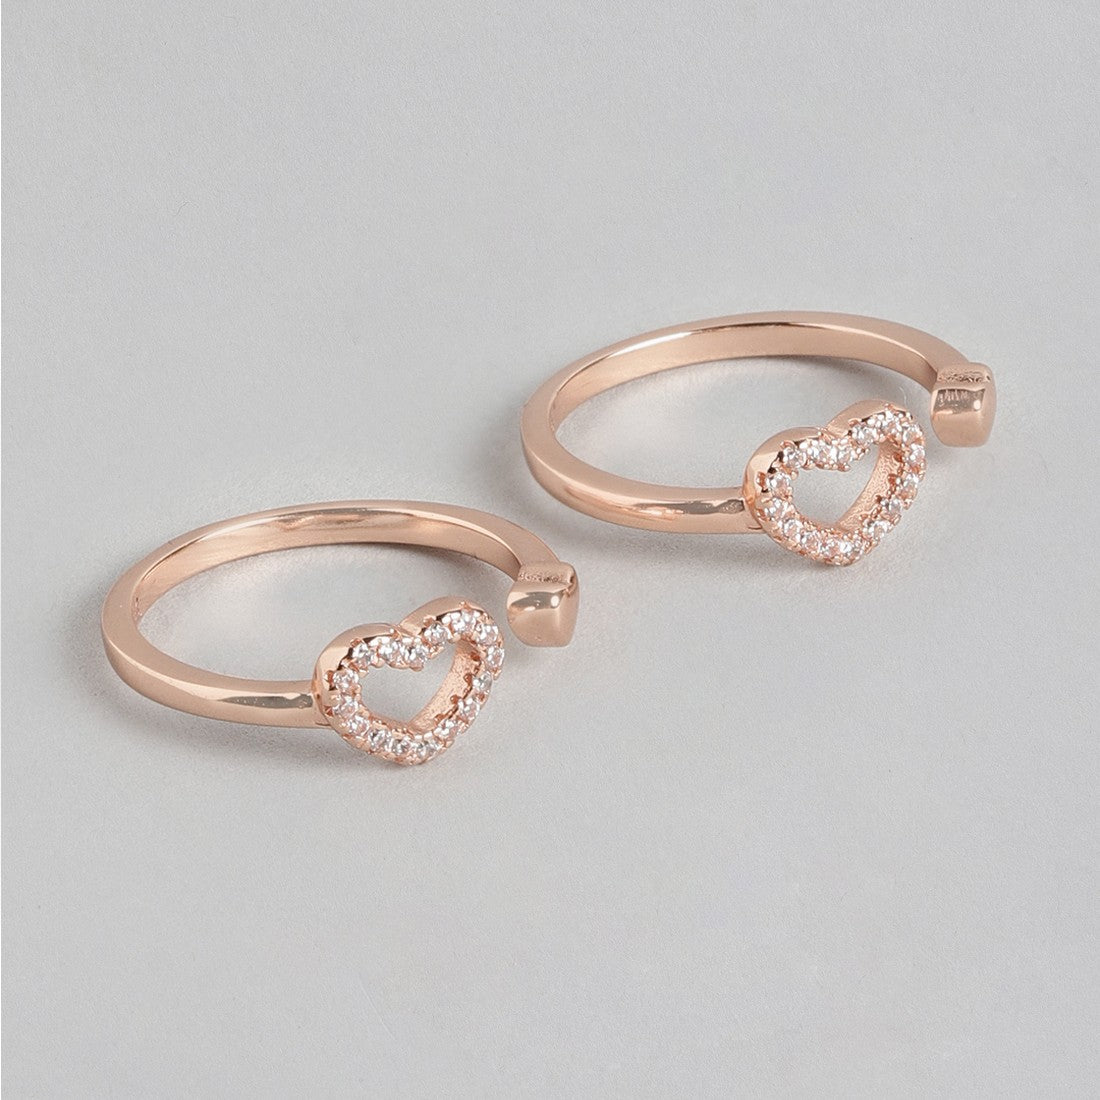 Dreamy Hearts Rose Gold 925 Silver Toe Ring